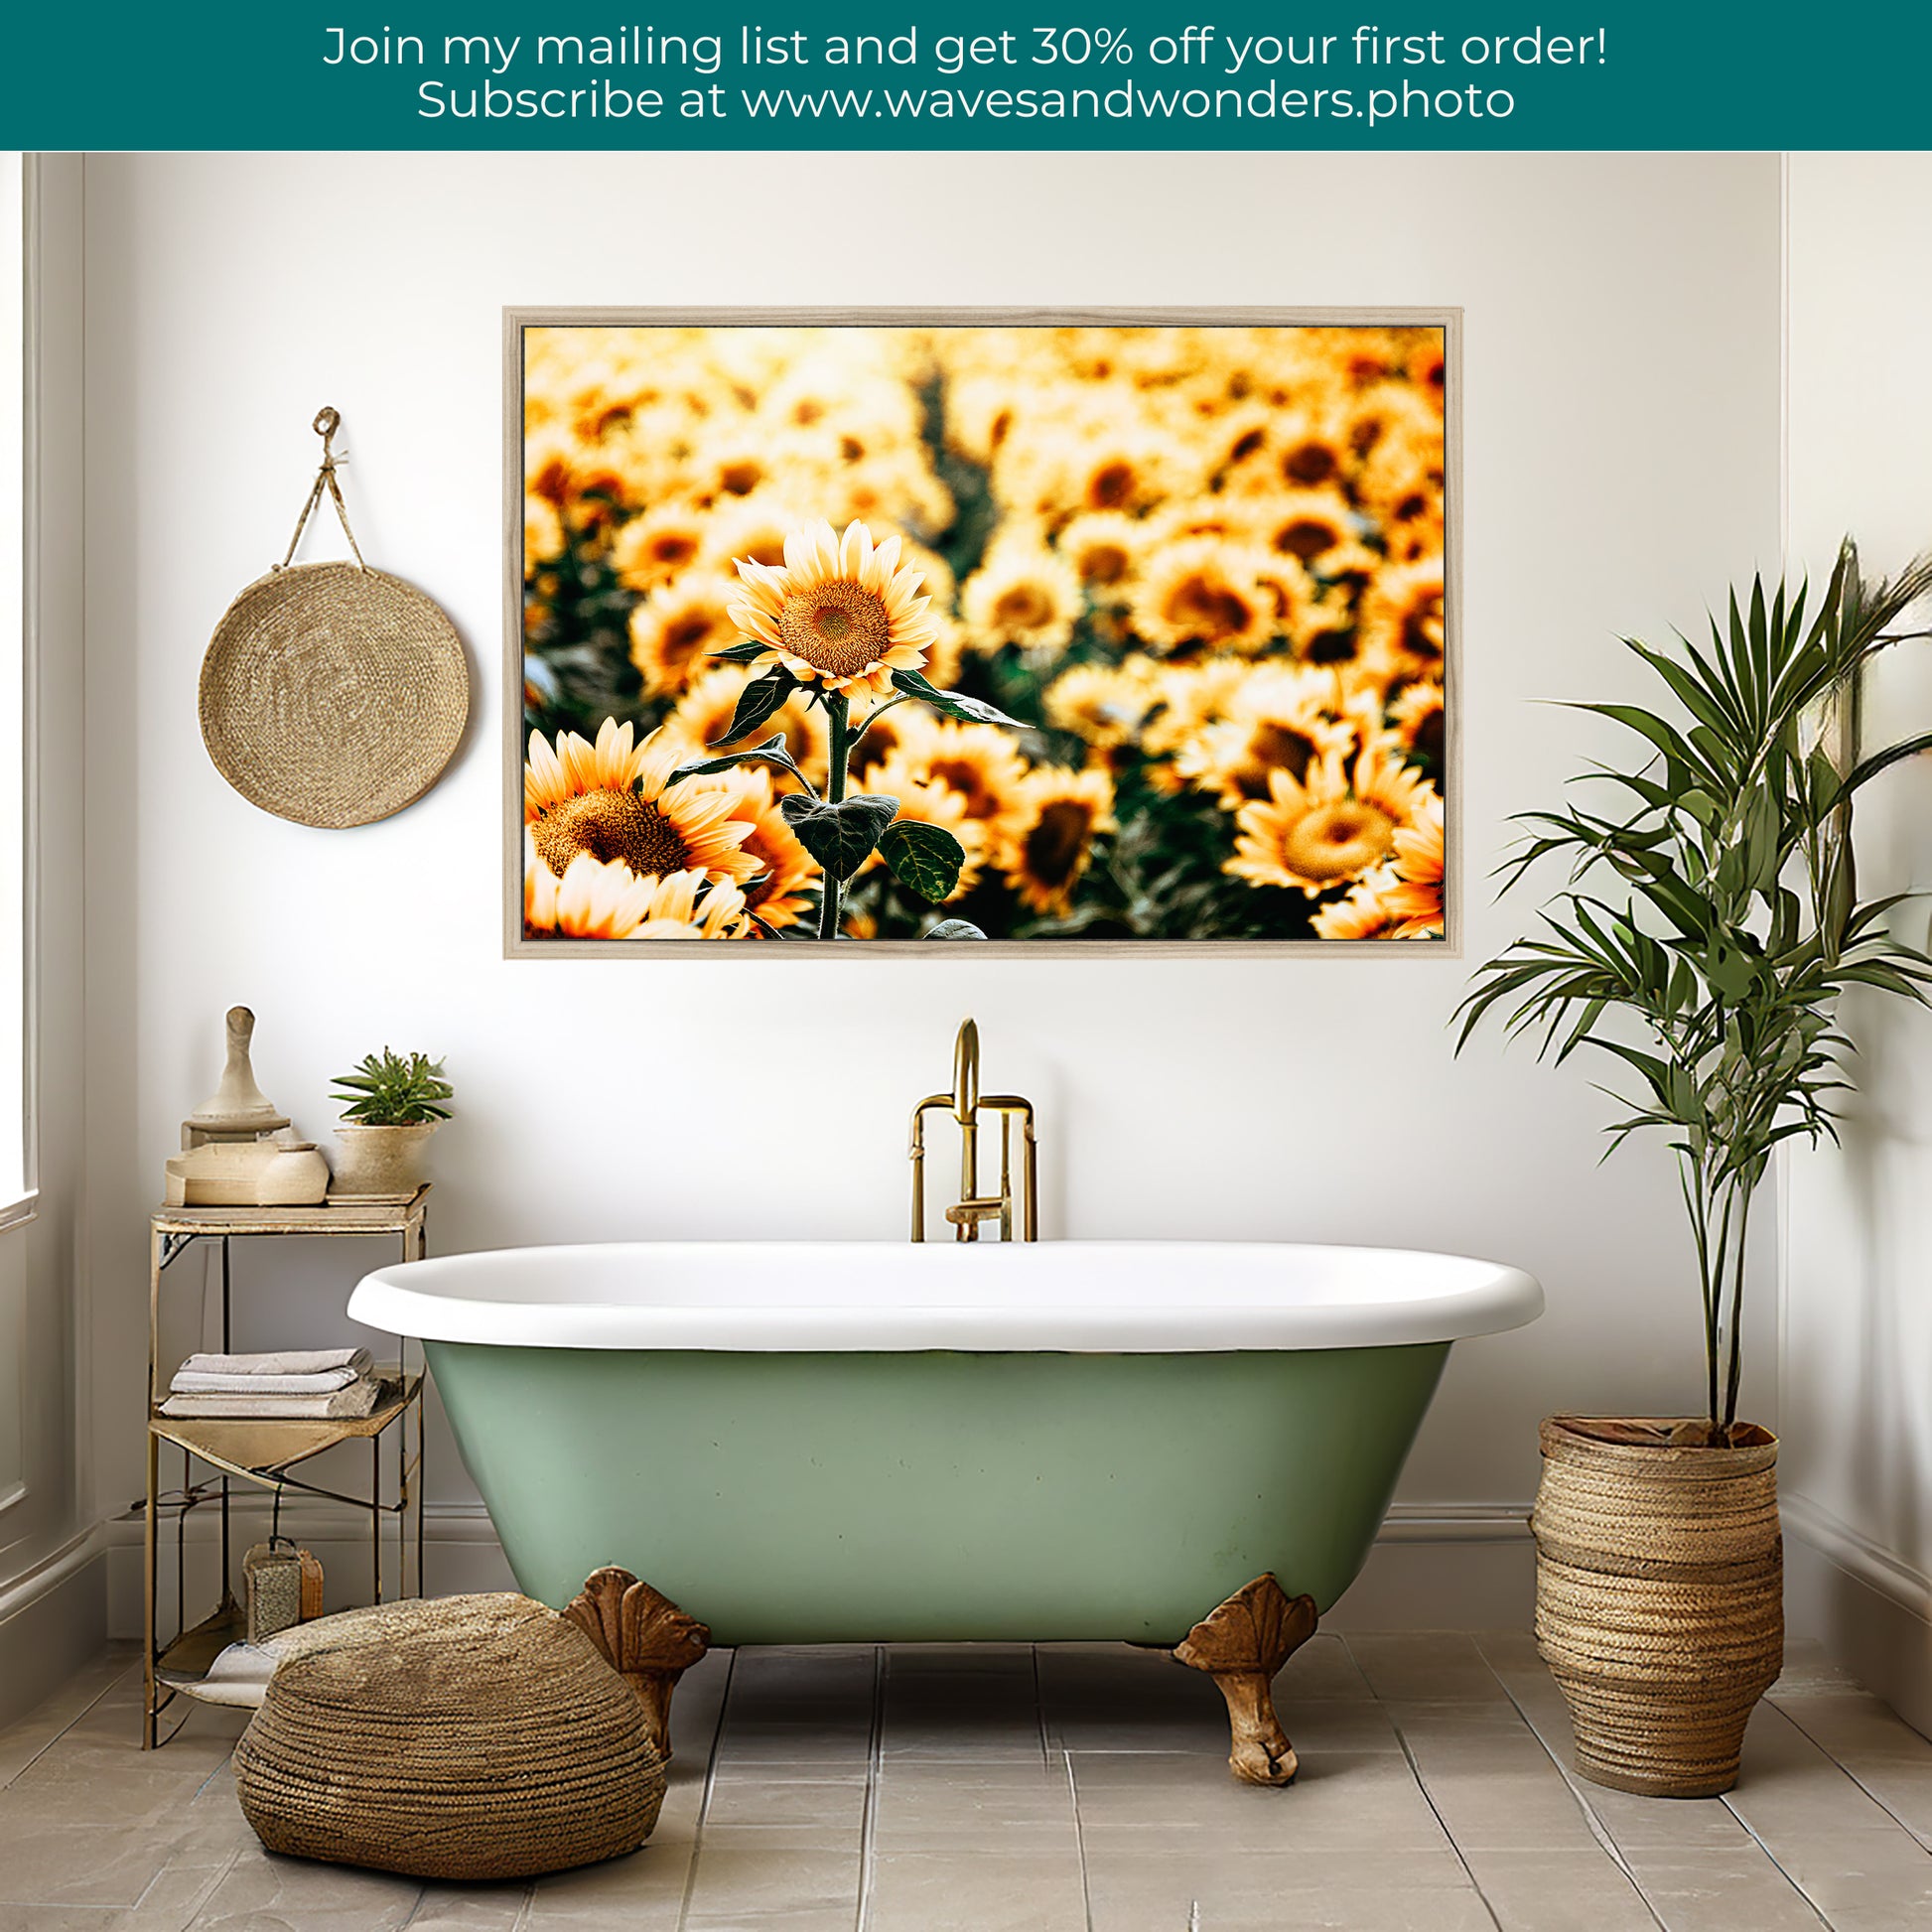 a bathroom with a bathtub, potted plants and a picture of sunflower